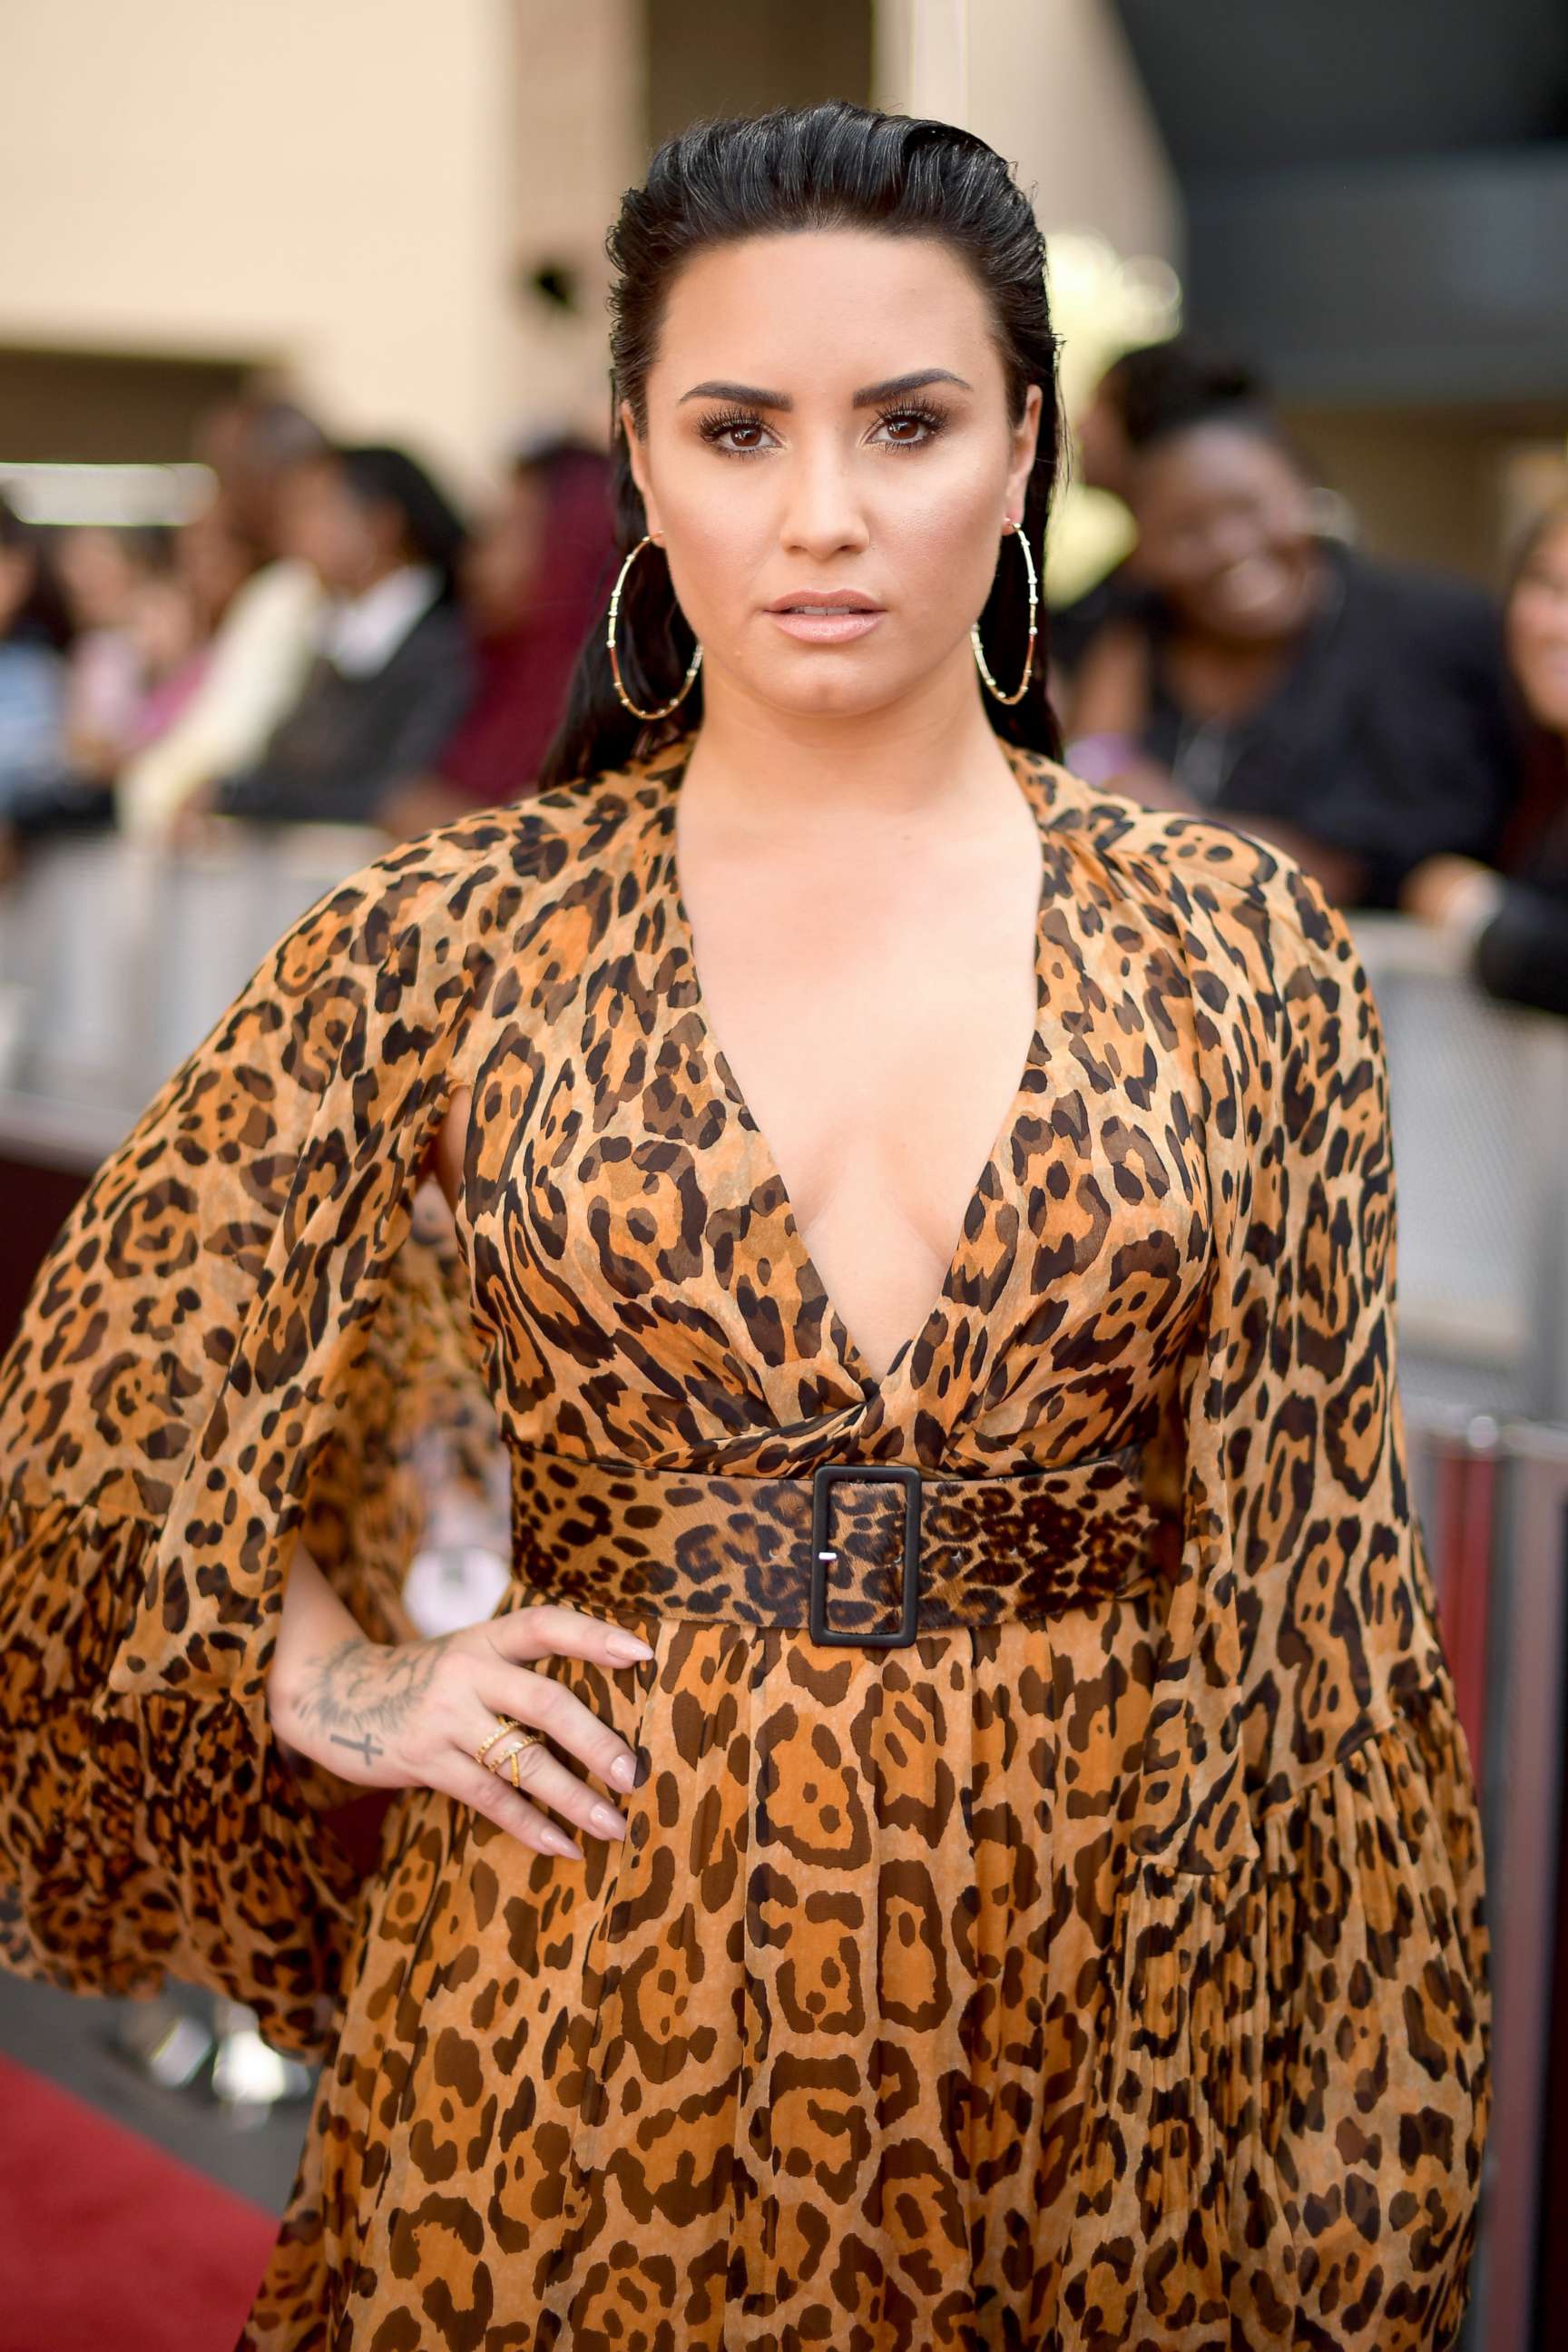 PHOTO: Recording artist Demi Lovato attends the 2018 Billboard Music Awards at MGM Grand Garden Arena, May 20, 2018, in Las Vegas.